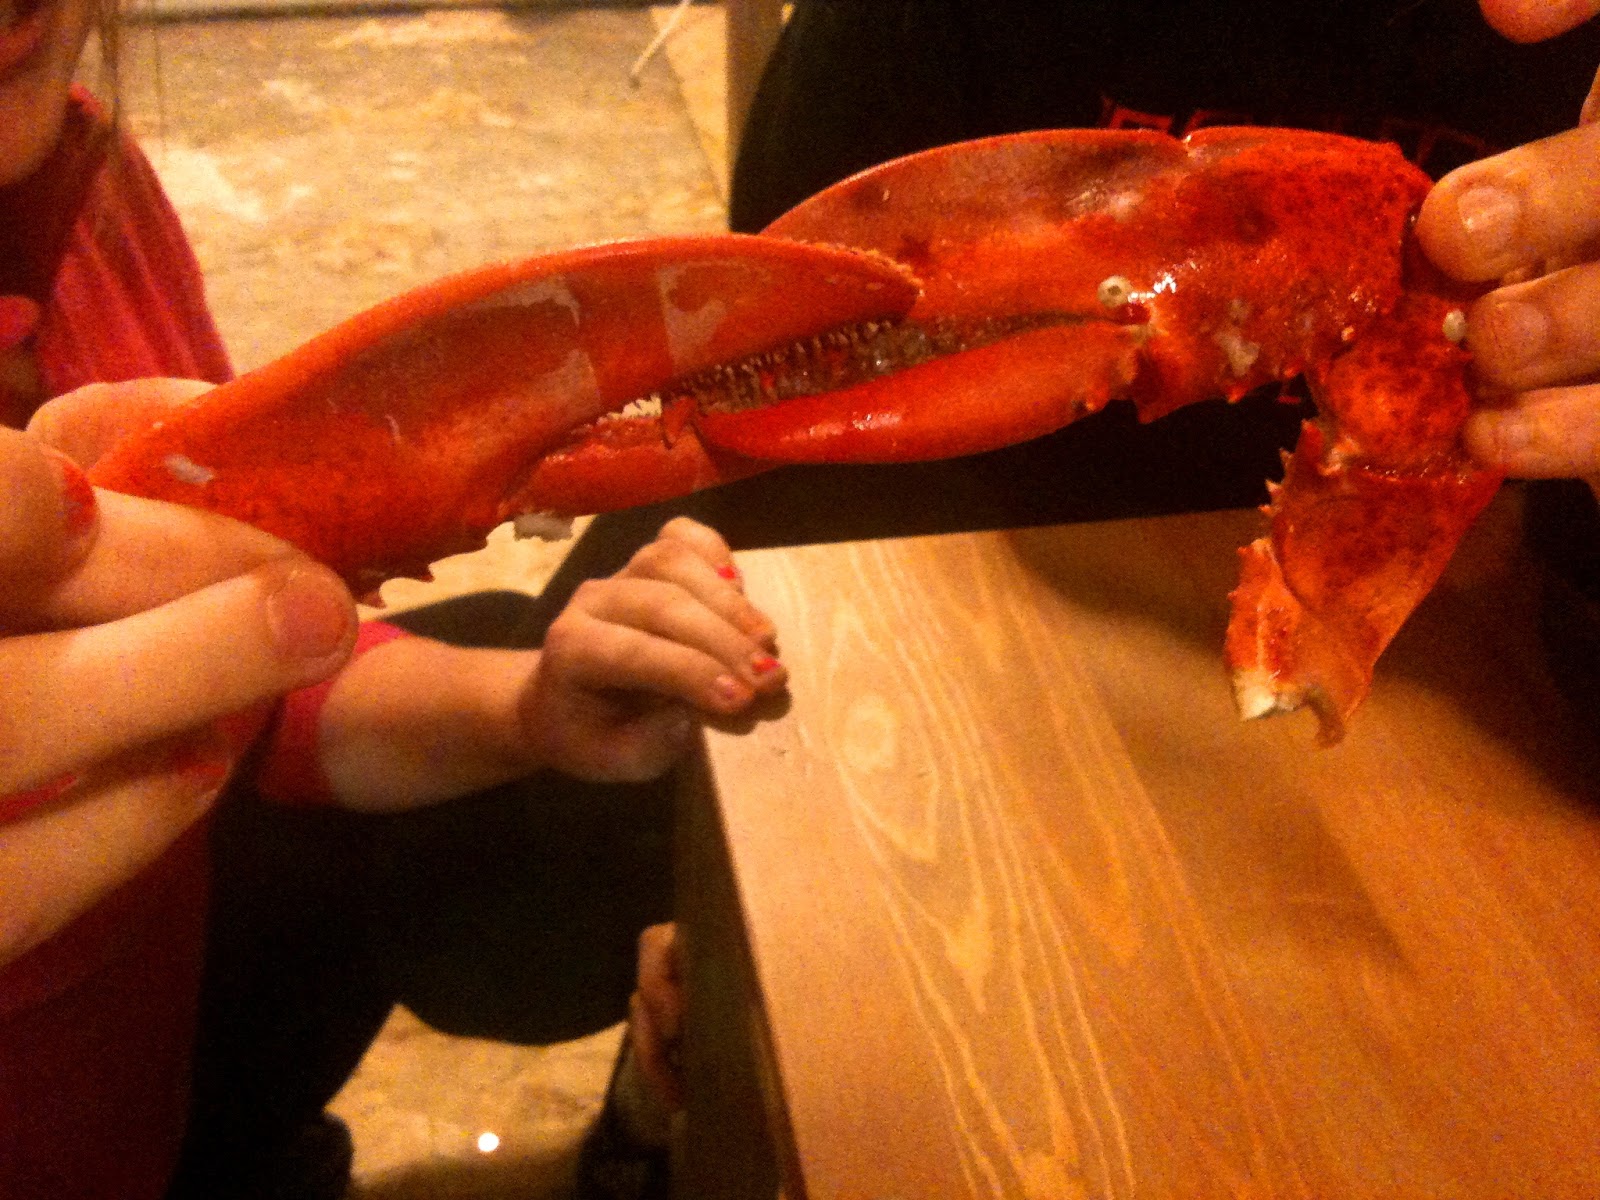 lobsters holding claws. though they were much more dead and dismembered